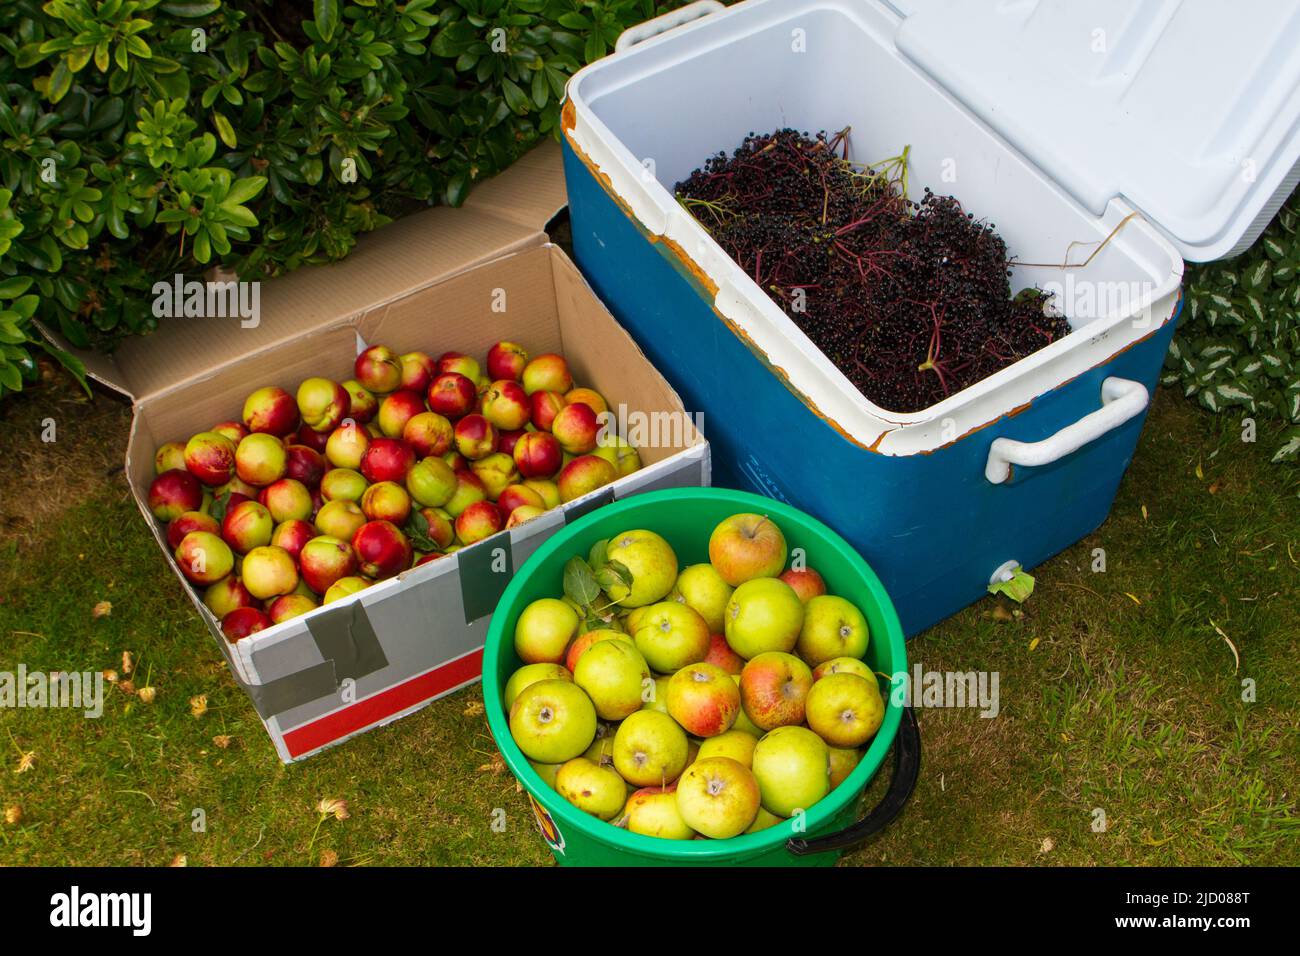 Life in New Zealand. Fishing, foraging, diving, gardening and sports. Freshly-foraged wild Apples, Nectarines and Elderberries, for wine-making. Stock Photo